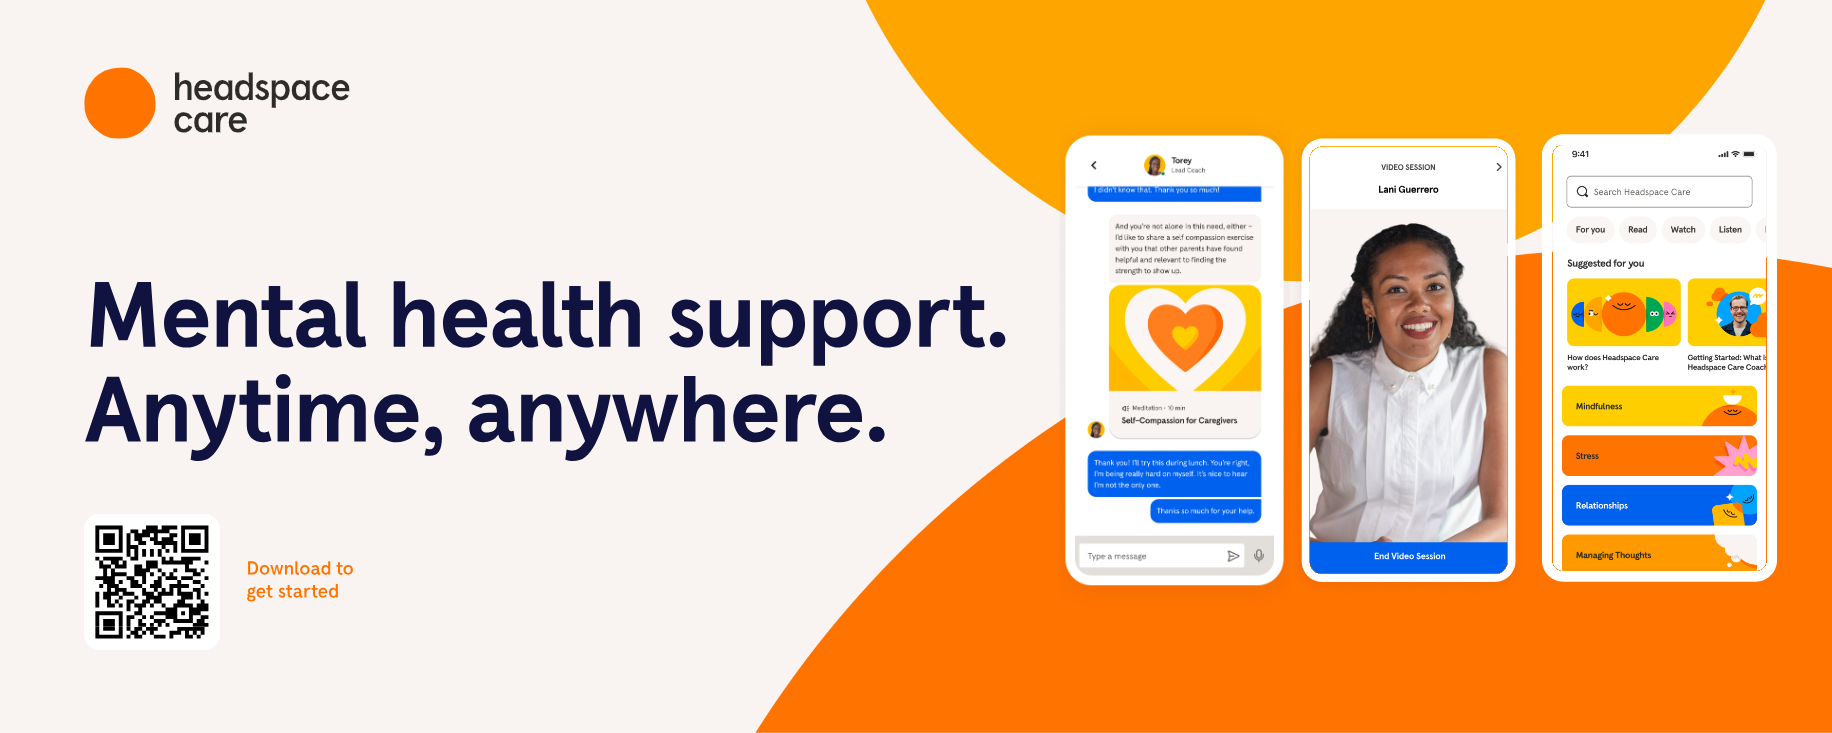 this image shows the layout of the Headspace application on a mobile device and features the tagline, "Mental Health support.  Anytime, Anywhere. "